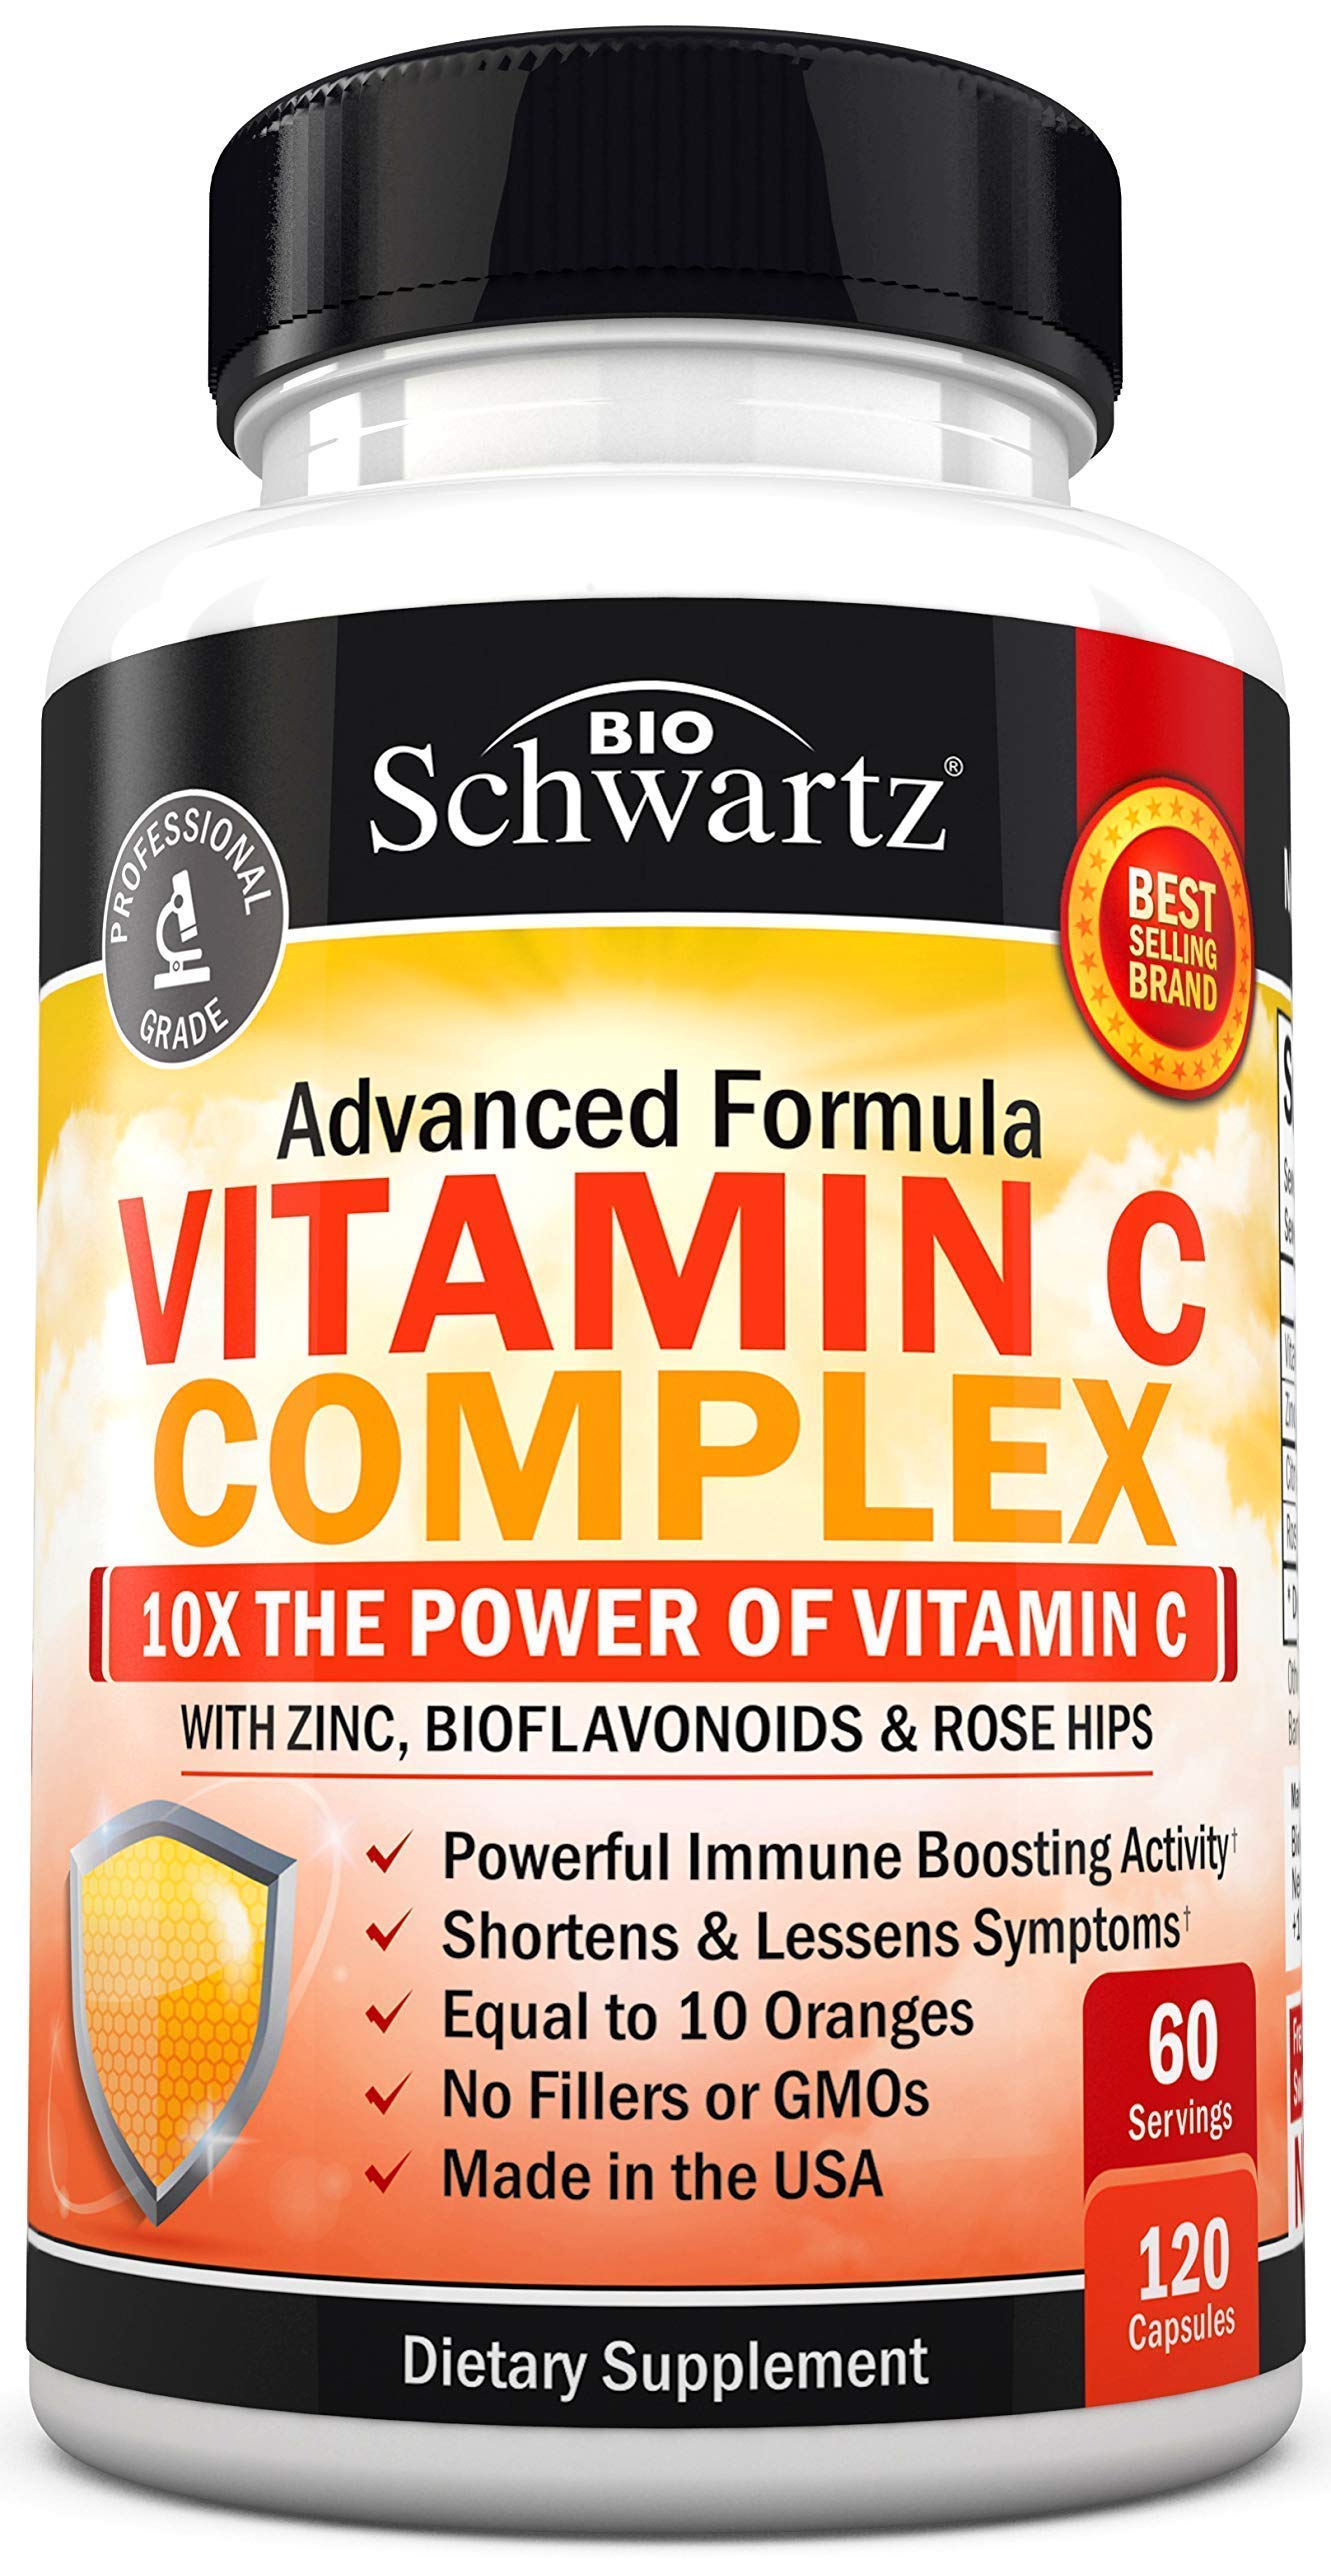 Immunity Boost Supplement with Elderberry, Vitamin A, Echinacea & Zinc + Vitamin C 1000mg Capsules with Zinc, Rose Hips & Bioflavonoids - Provides Enhanced Immune Support